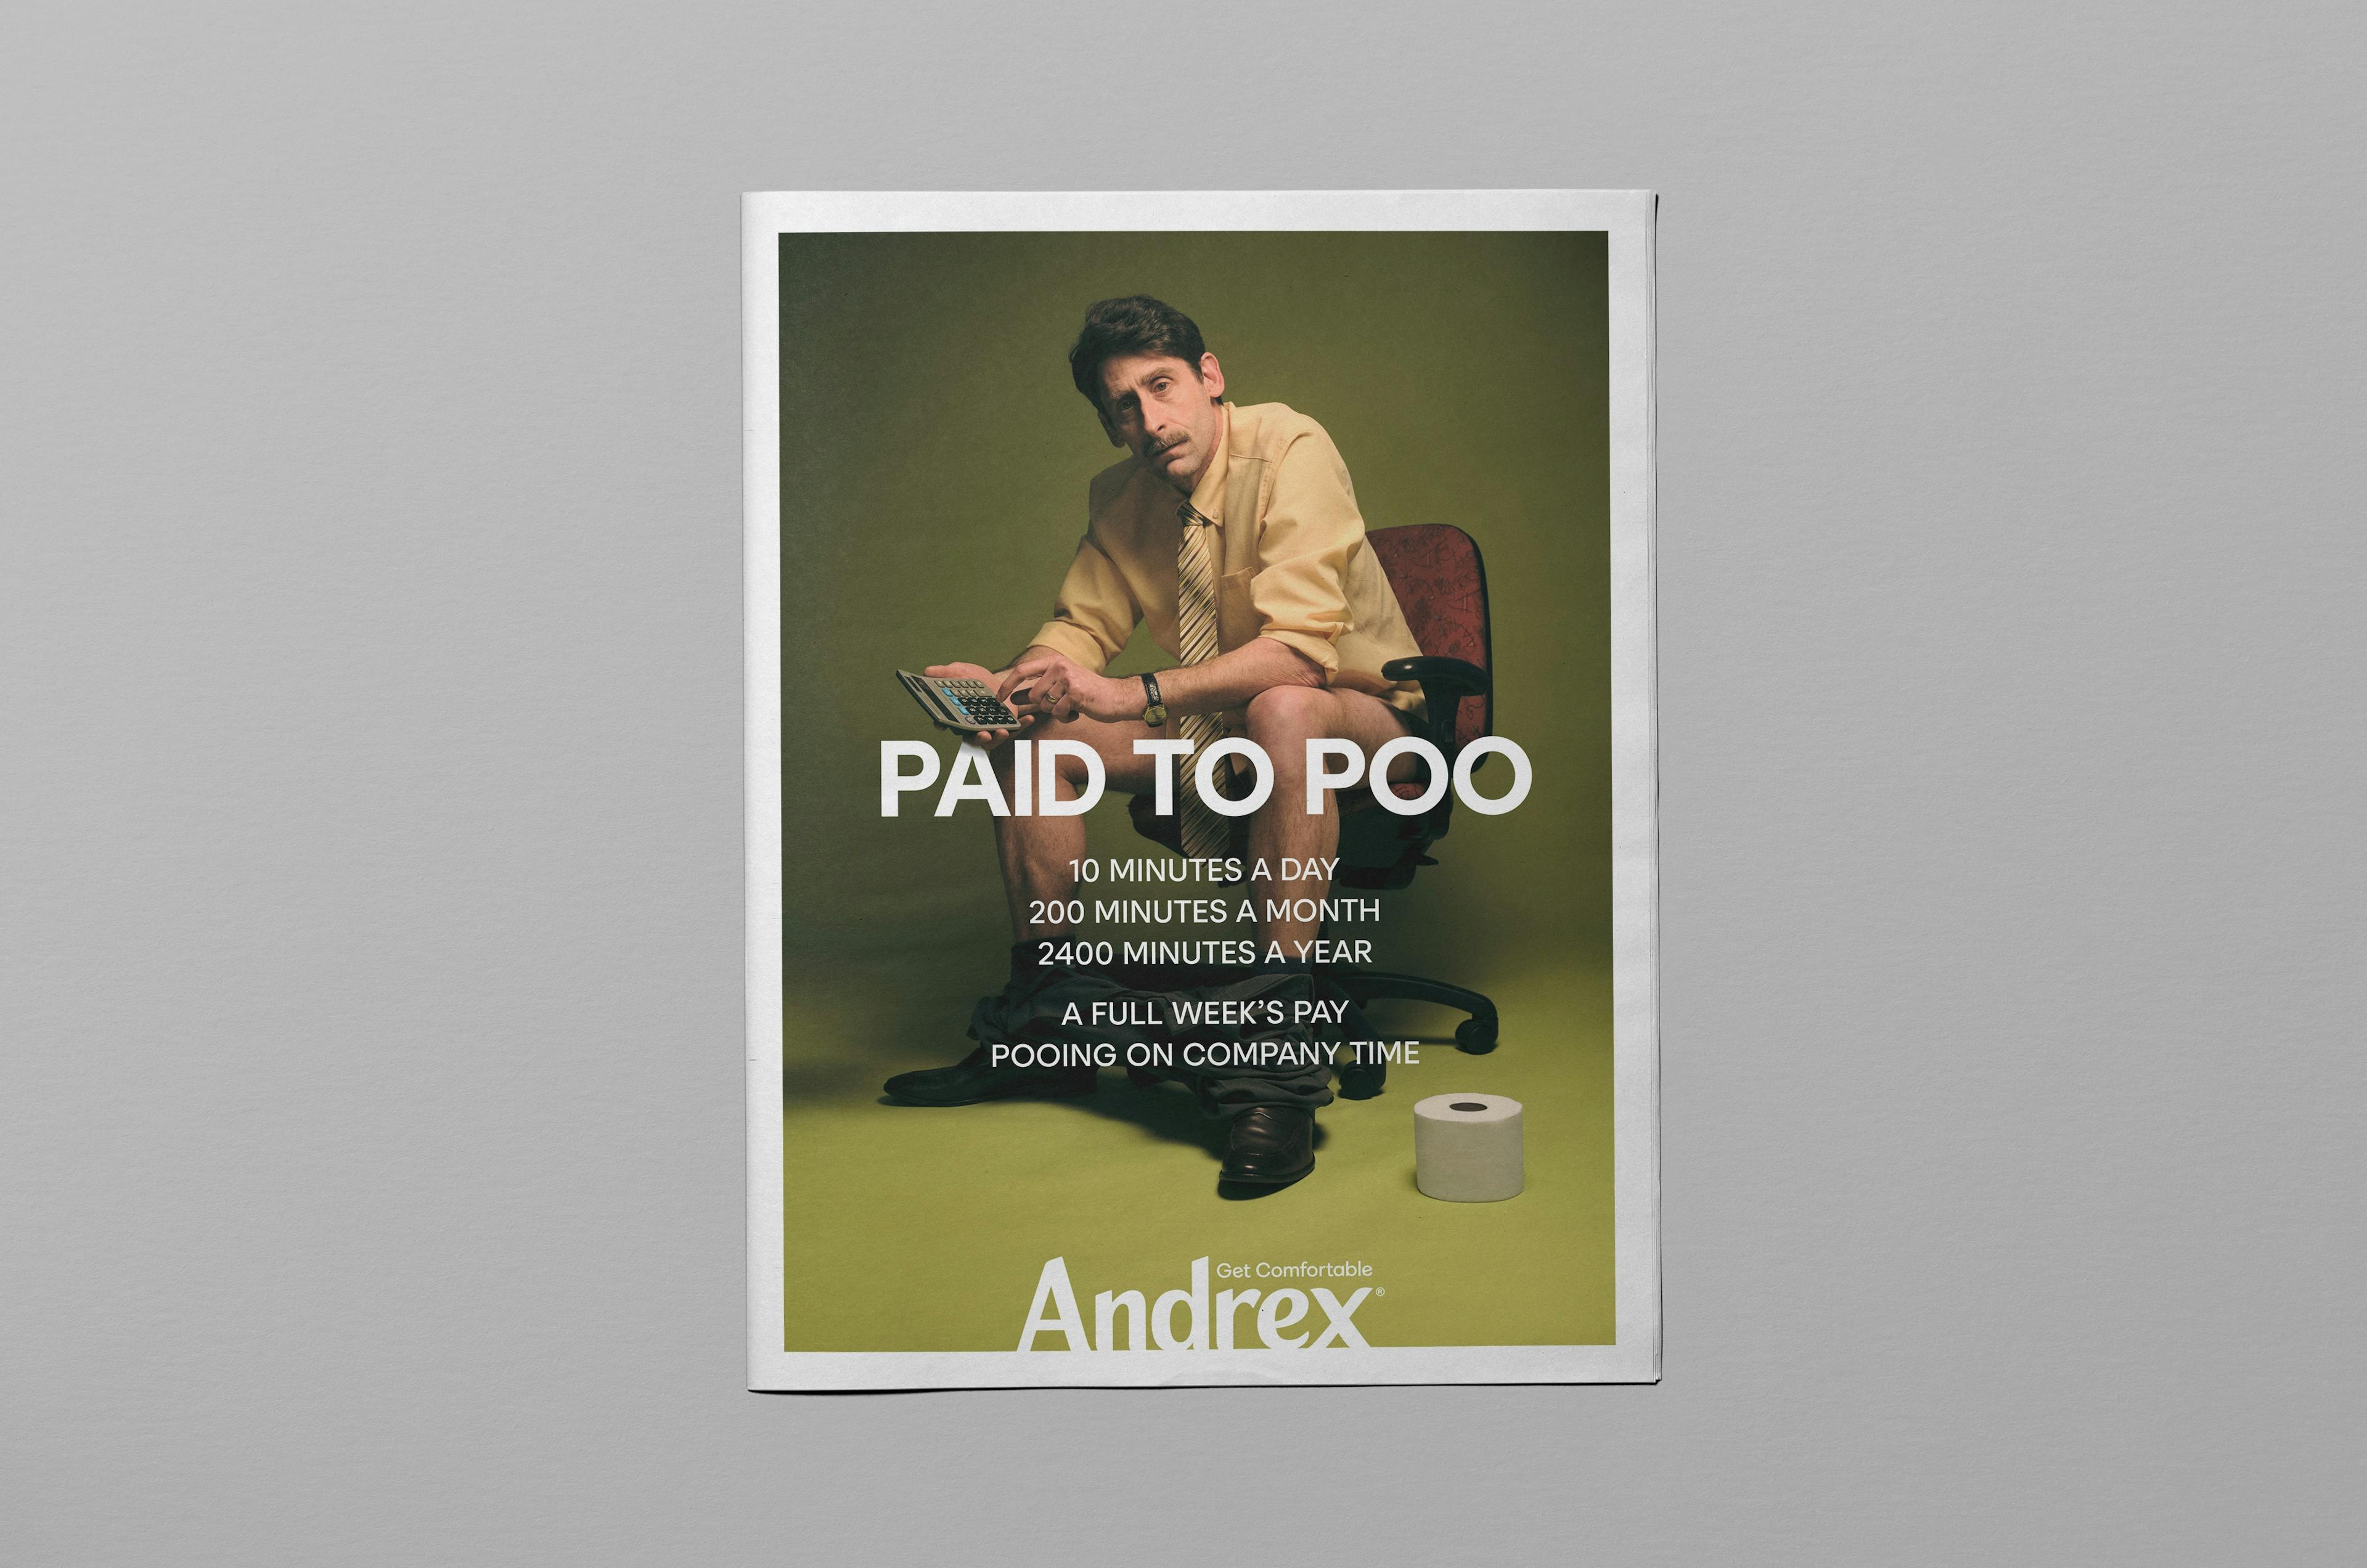 Man sitting in an office environment with a contemplative expression, alongside text promoting financial gain from bathroom breaks, for an Andrex advertisement.